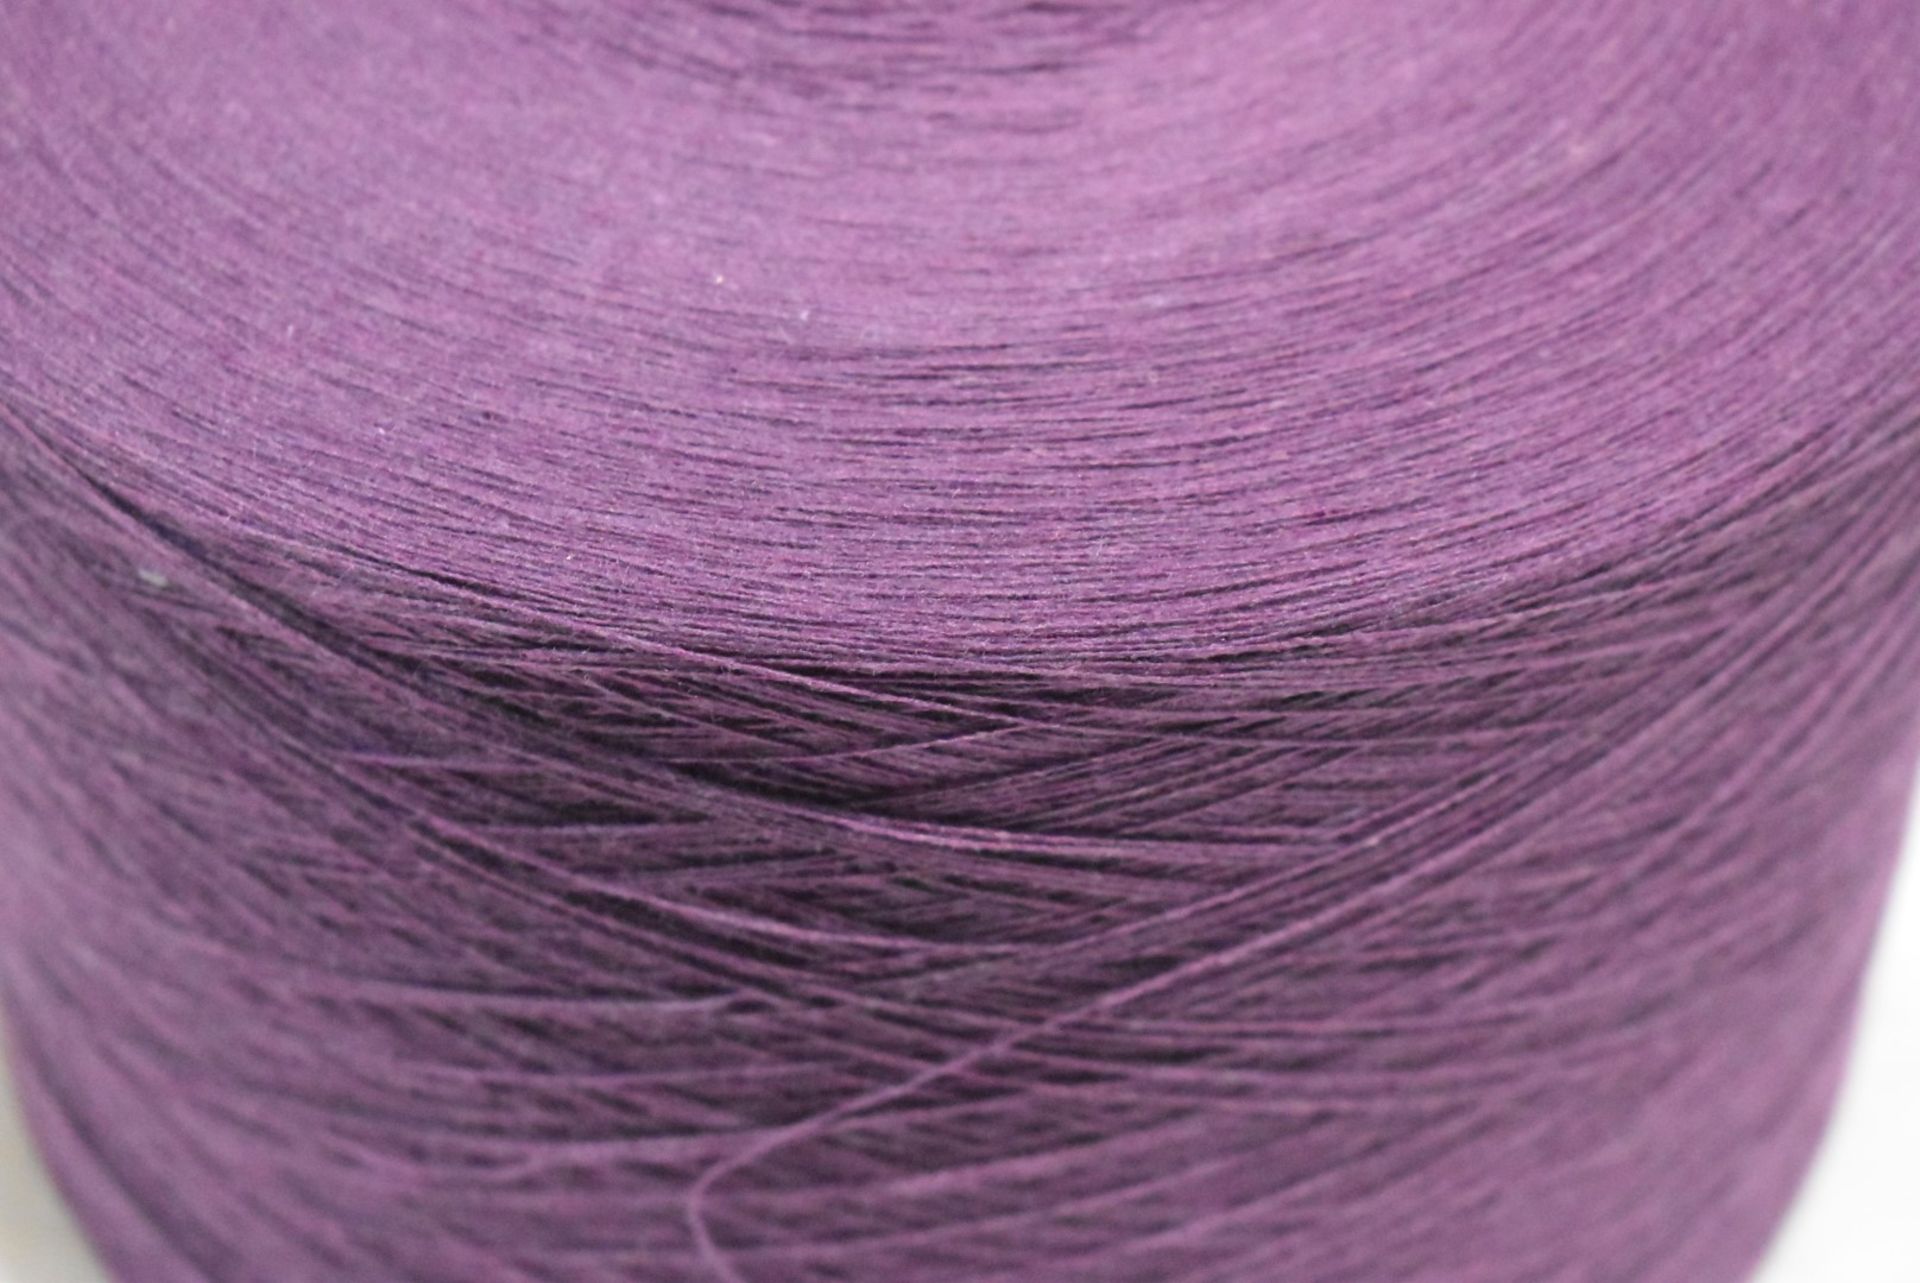 1 x Cone of 1/13 MicroCotton Knitting Yarn - Purple - Approx Weight: 2,300g - New Stock ABL Yarn - Image 5 of 13